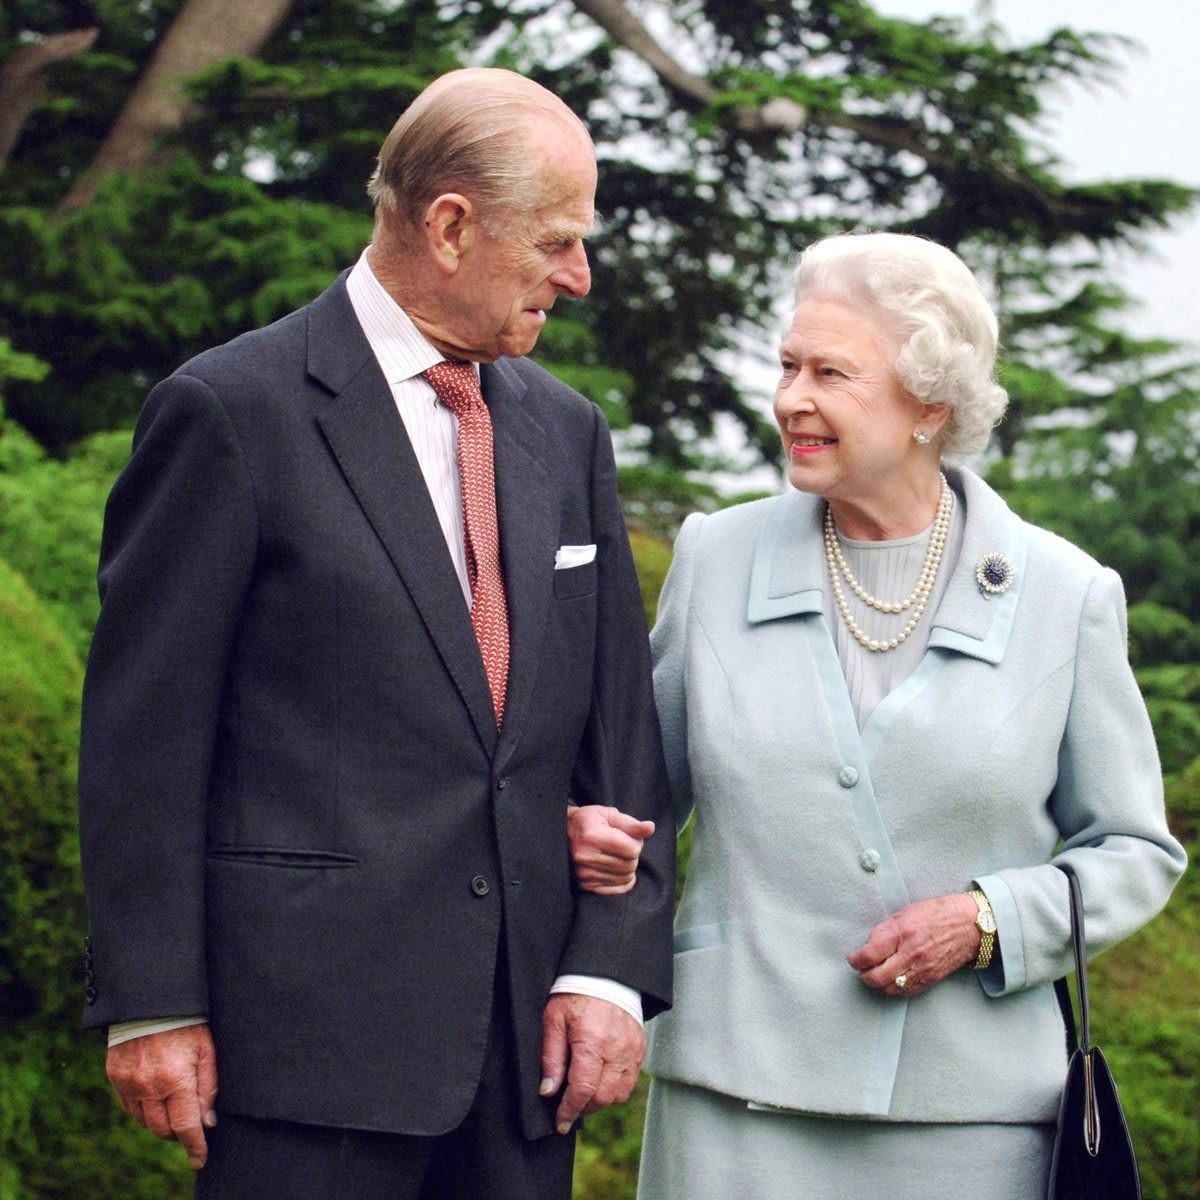 The Queen's husband, Prince Philip, has passed away